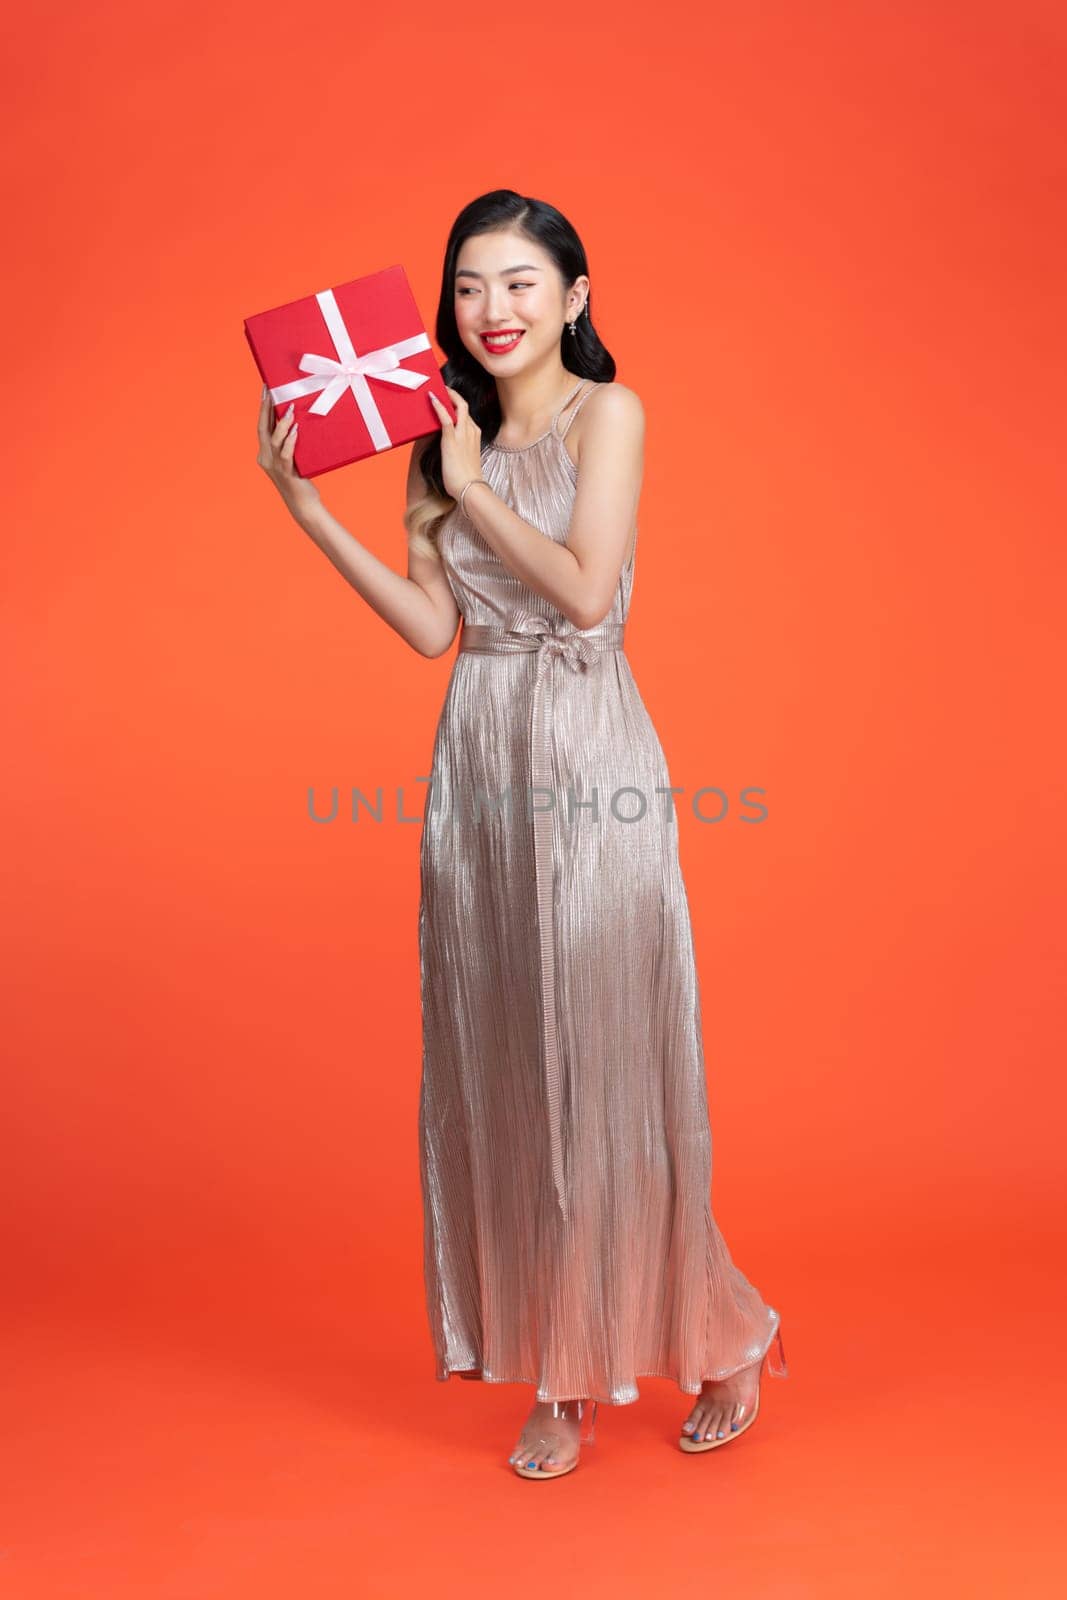 Portrait of happy girl shaking gift box wondering what inside as celebrating presents on red background by makidotvn